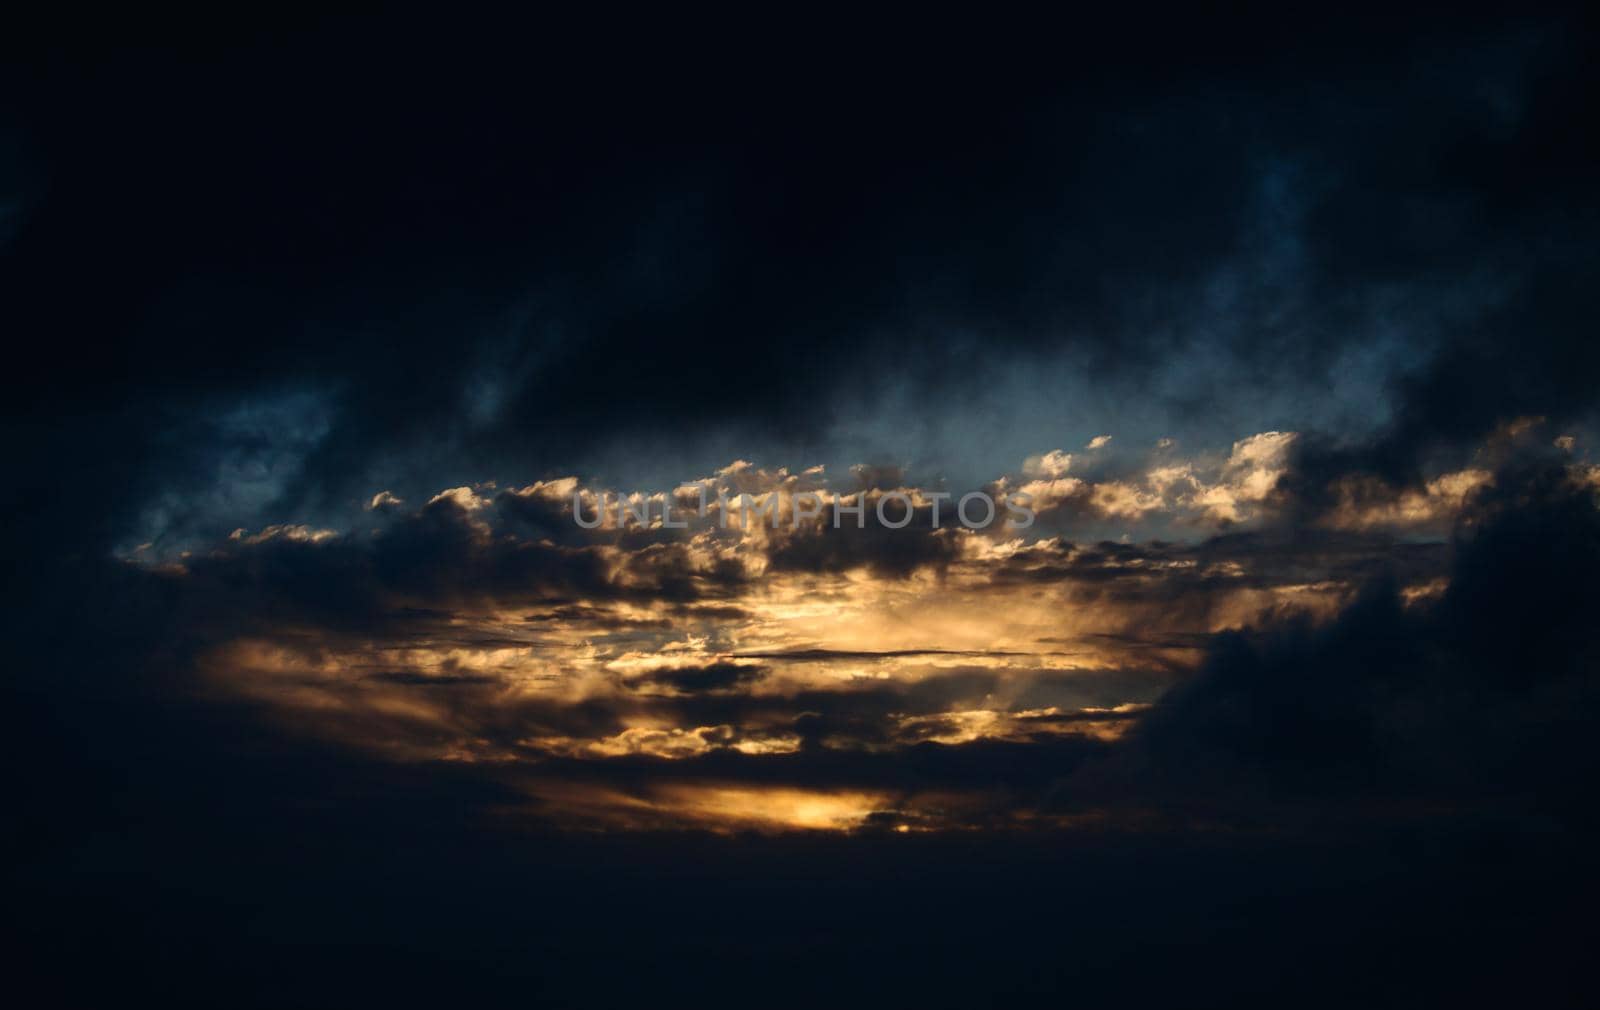 Dramatic dark evening sky landscape with moody clouds and golden sunlight